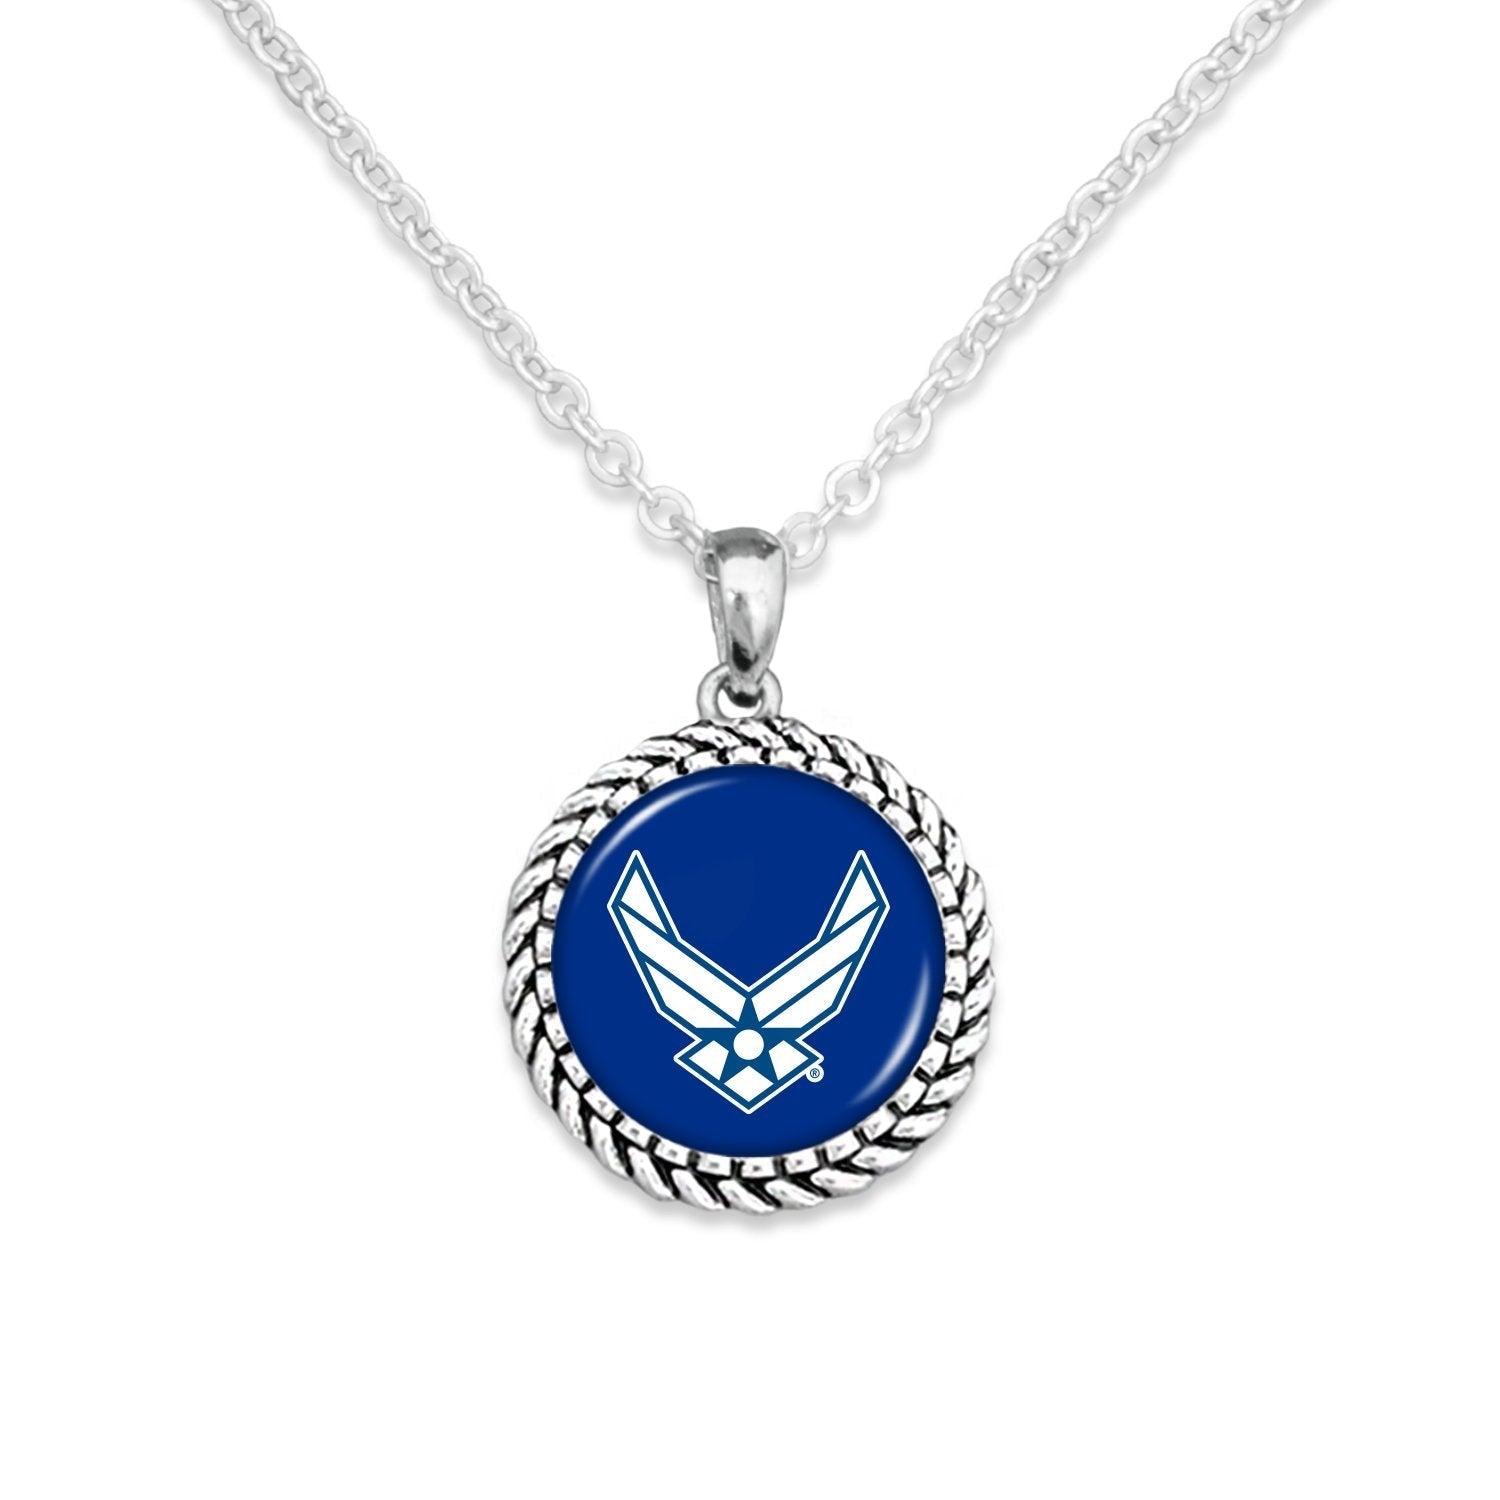 AIR FORCE WINGS ROPE EDGE NECKLACE